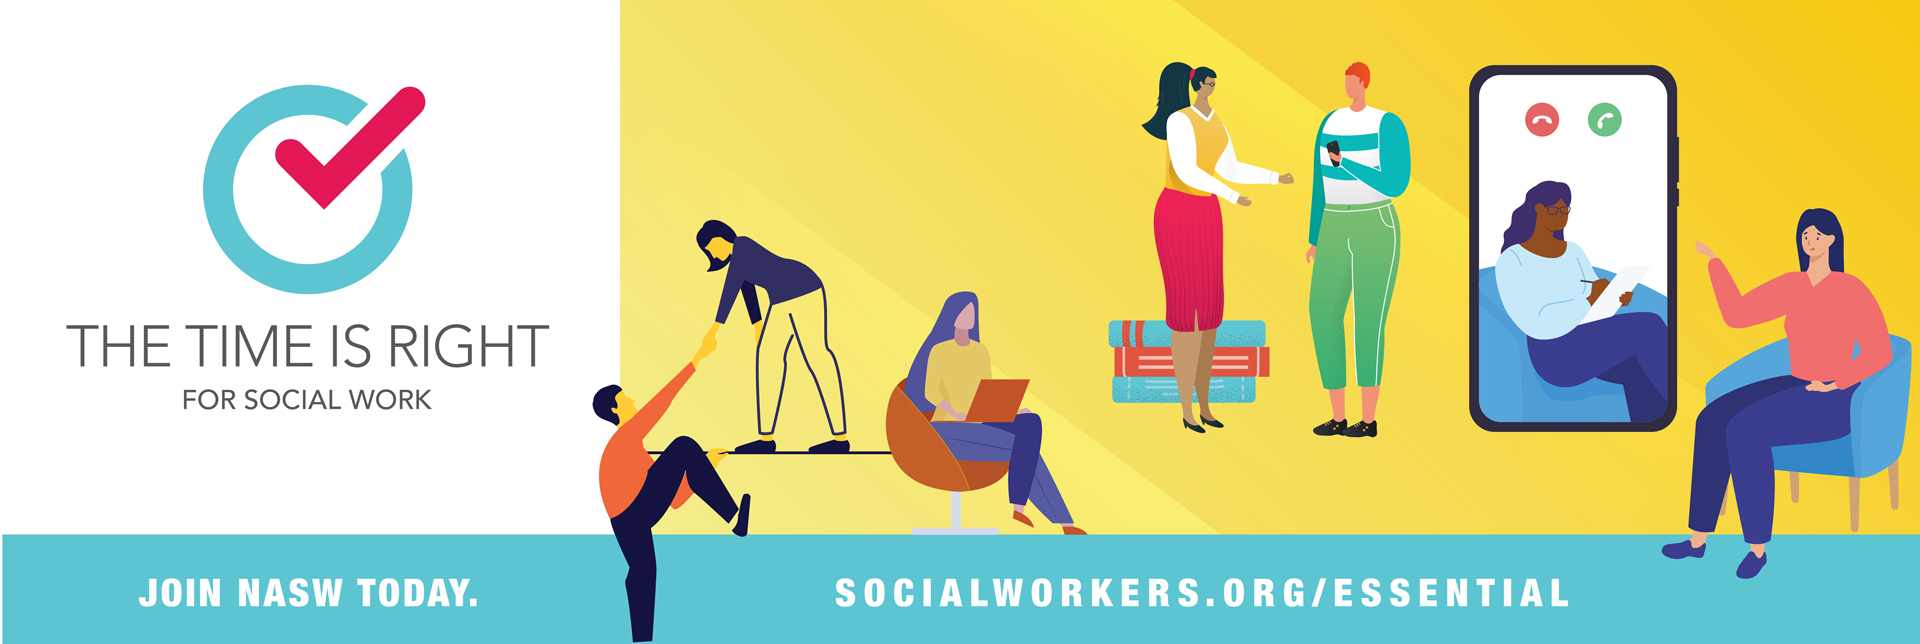 The Time Is Right For Social Work. Join NASW Today at SocialWorkers.org/join